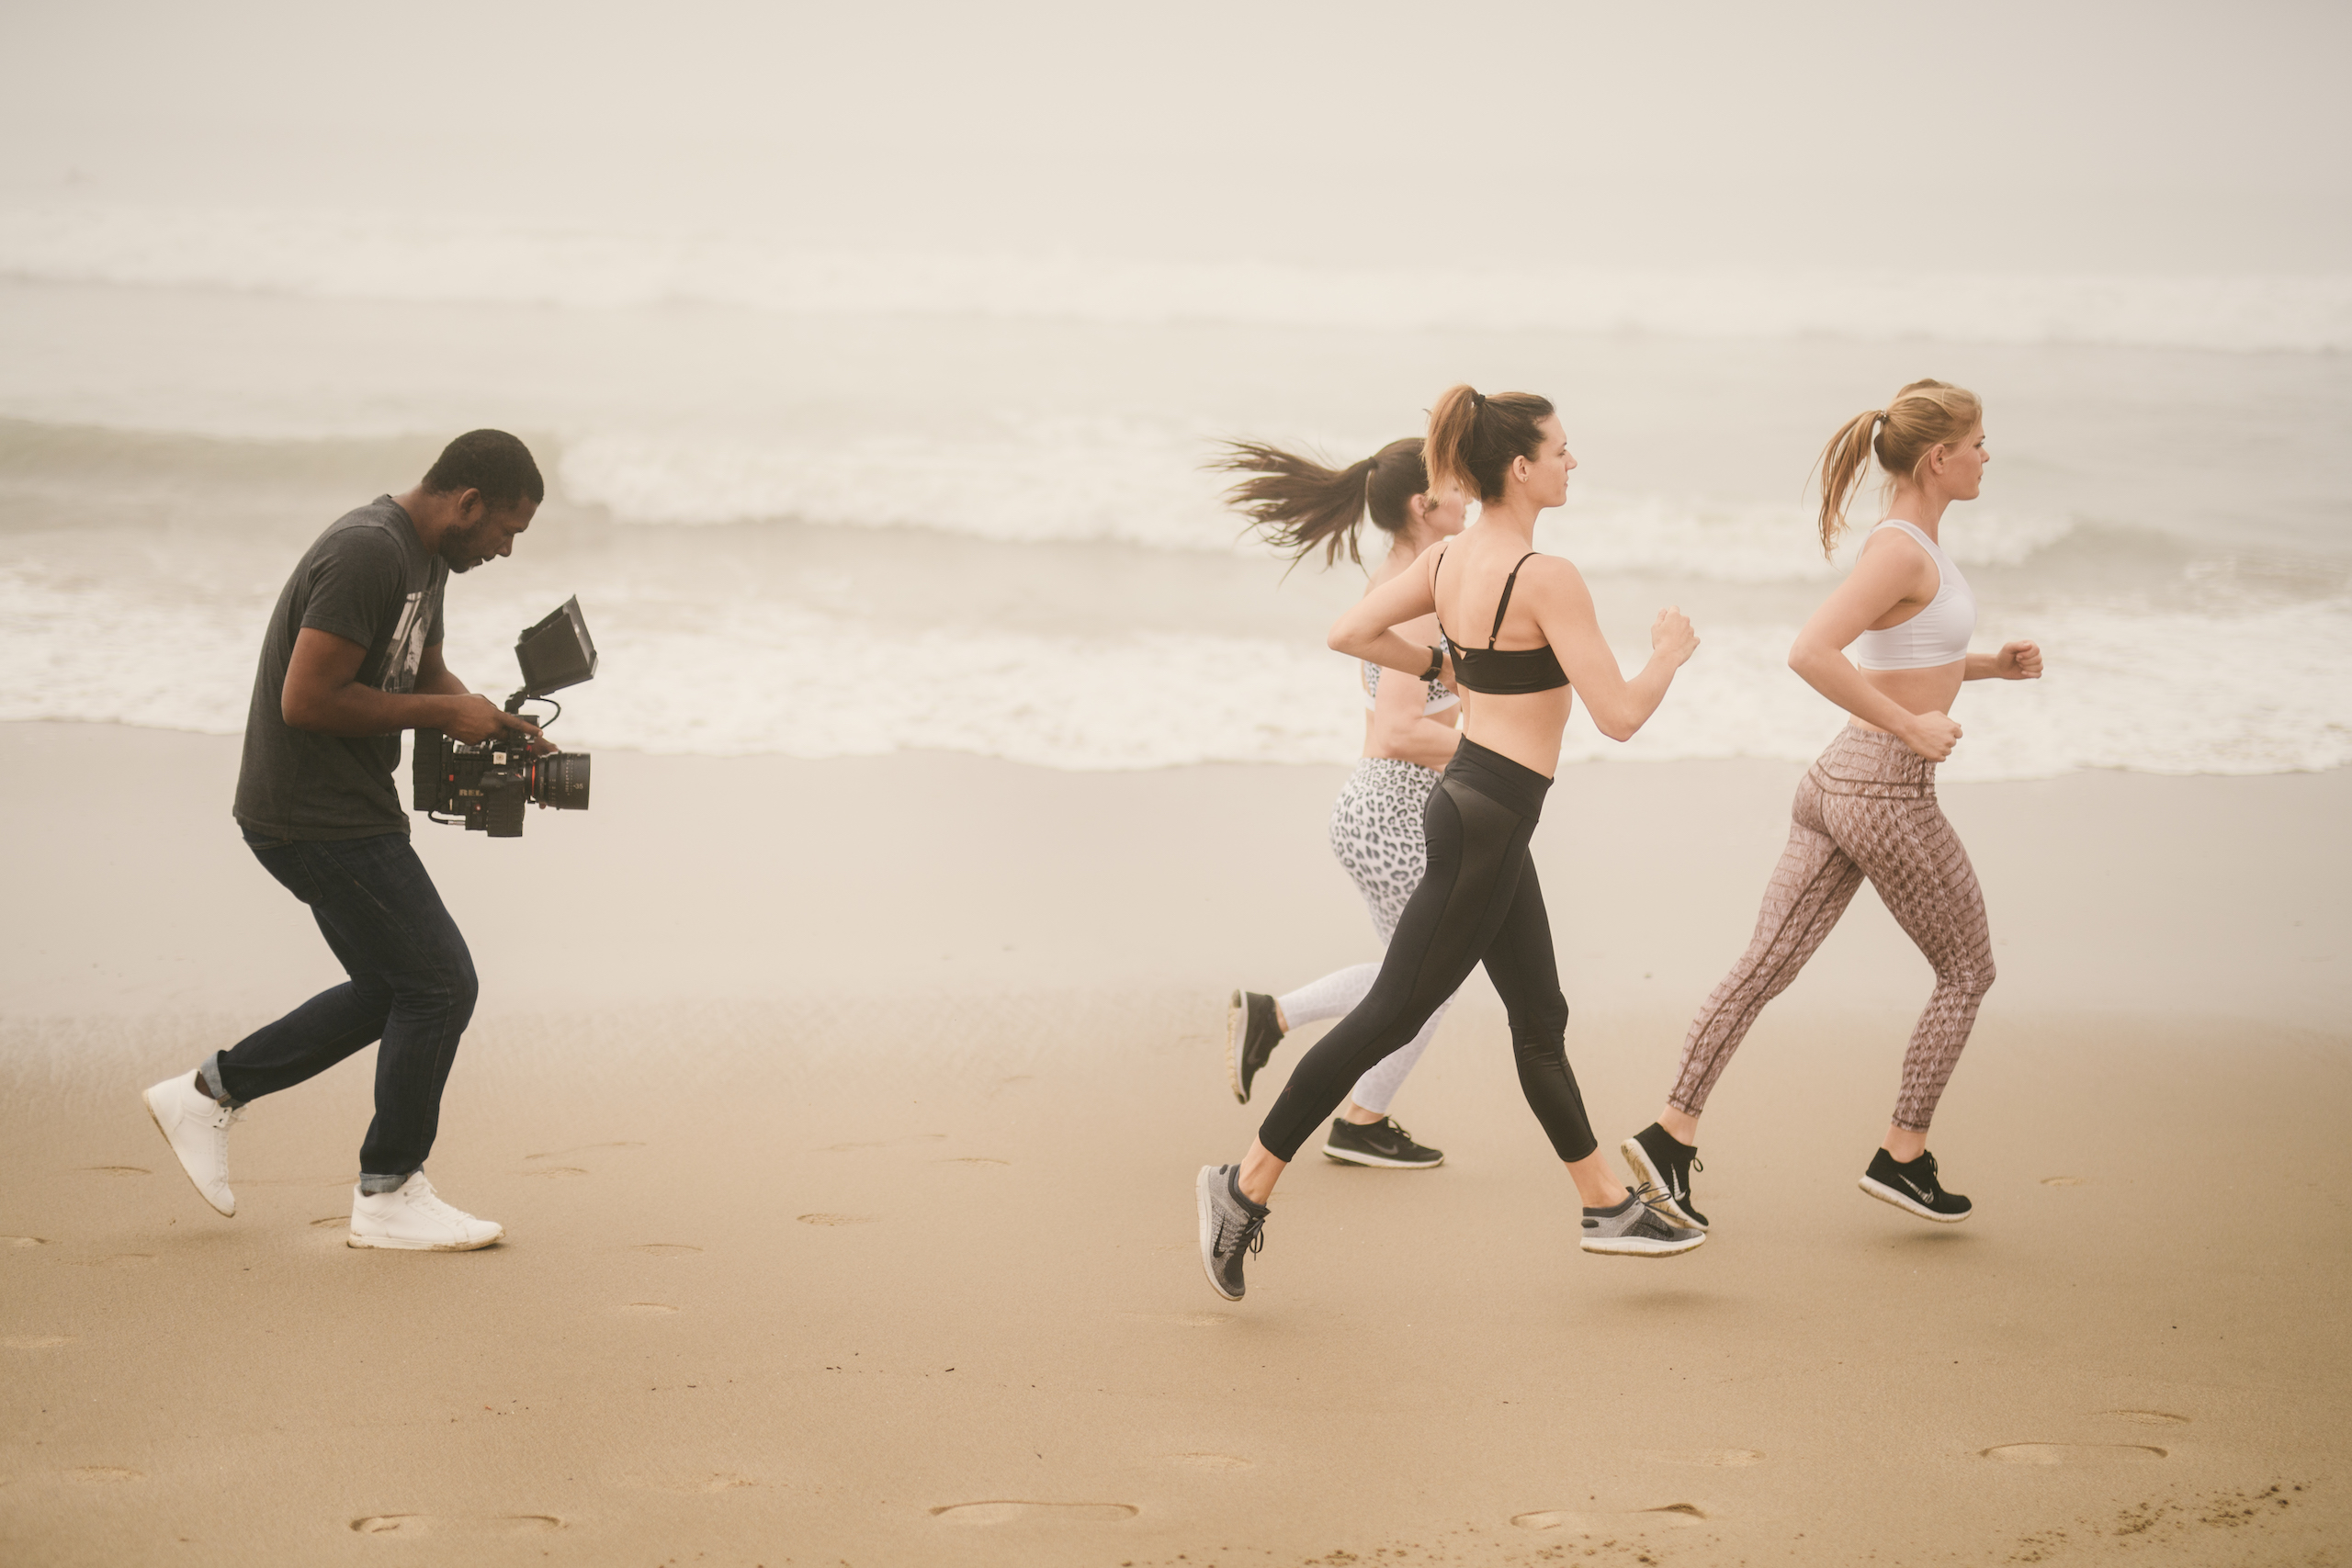 Health and Fitness Marketing Kinetix 365 Beach Exercises BTS Three women running on the beach with a videographer filming them from behind